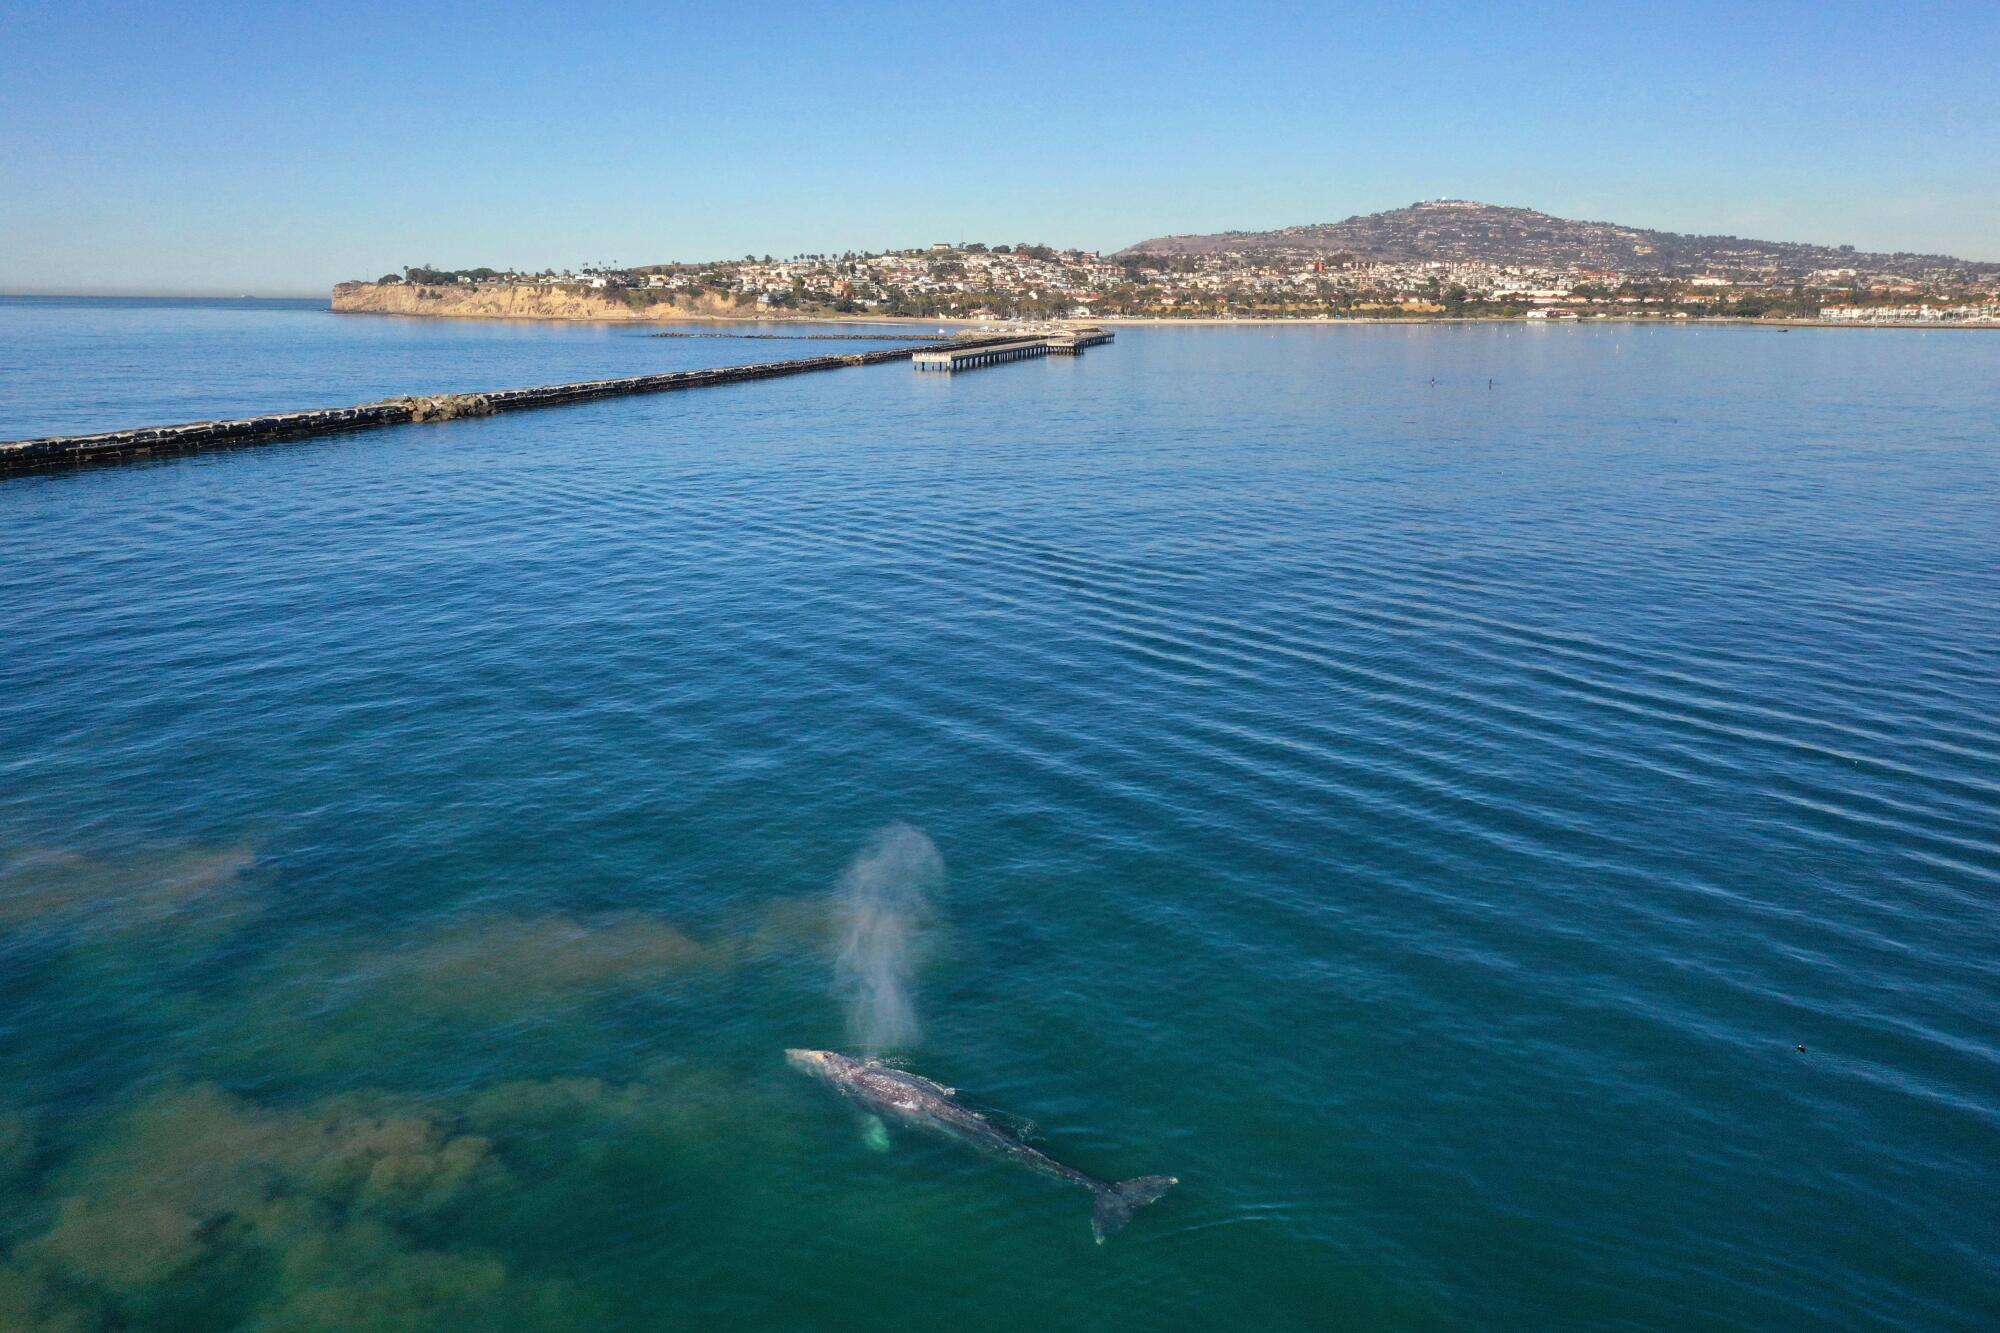 A whale sprays a plume of mist into the air as it swims by land.